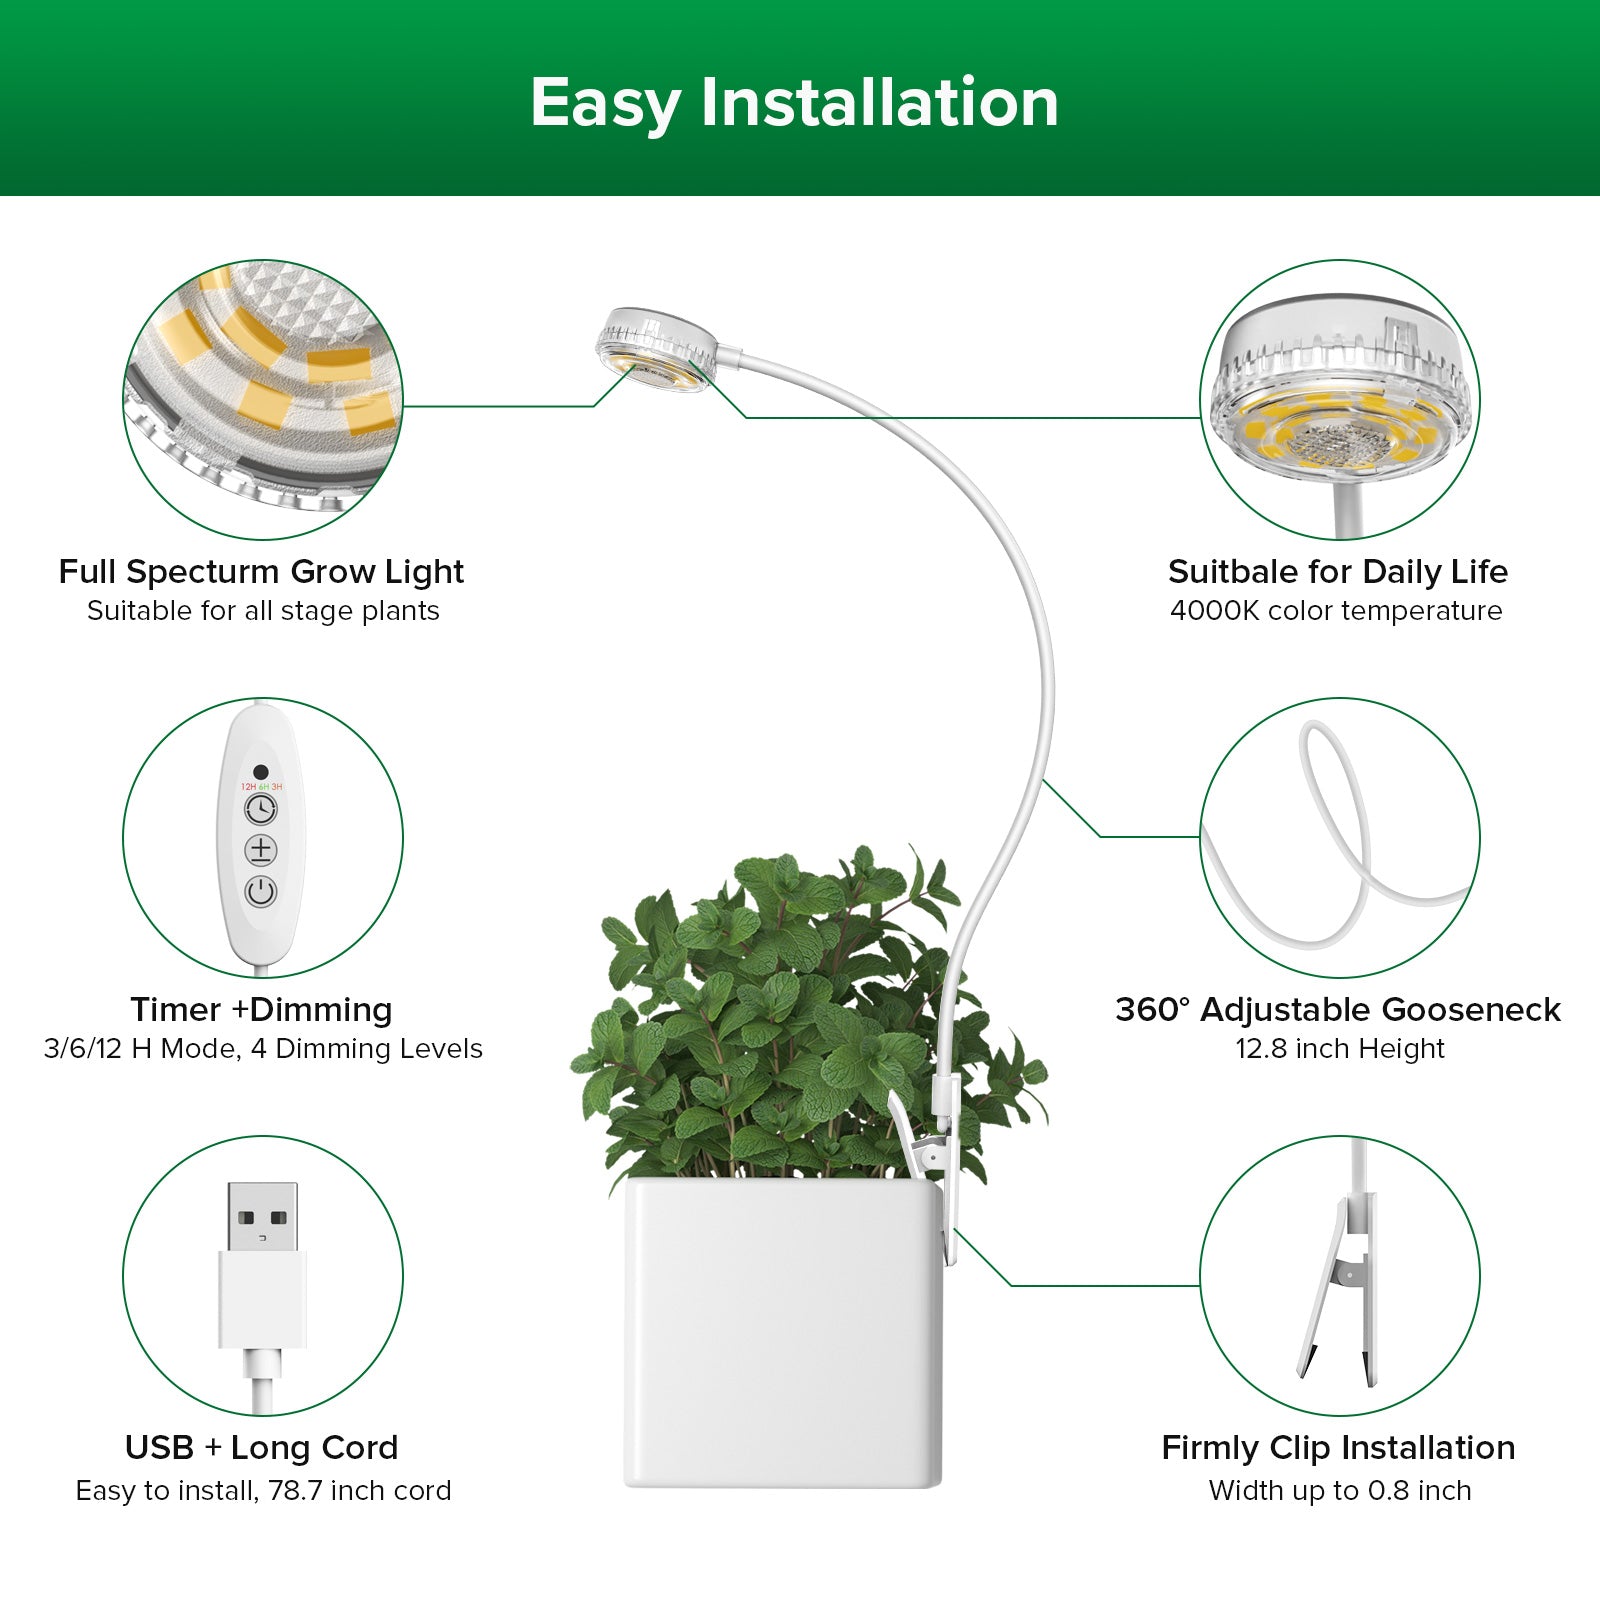 Pot Clip LED Grow Light(US ONLY) is easy to install.